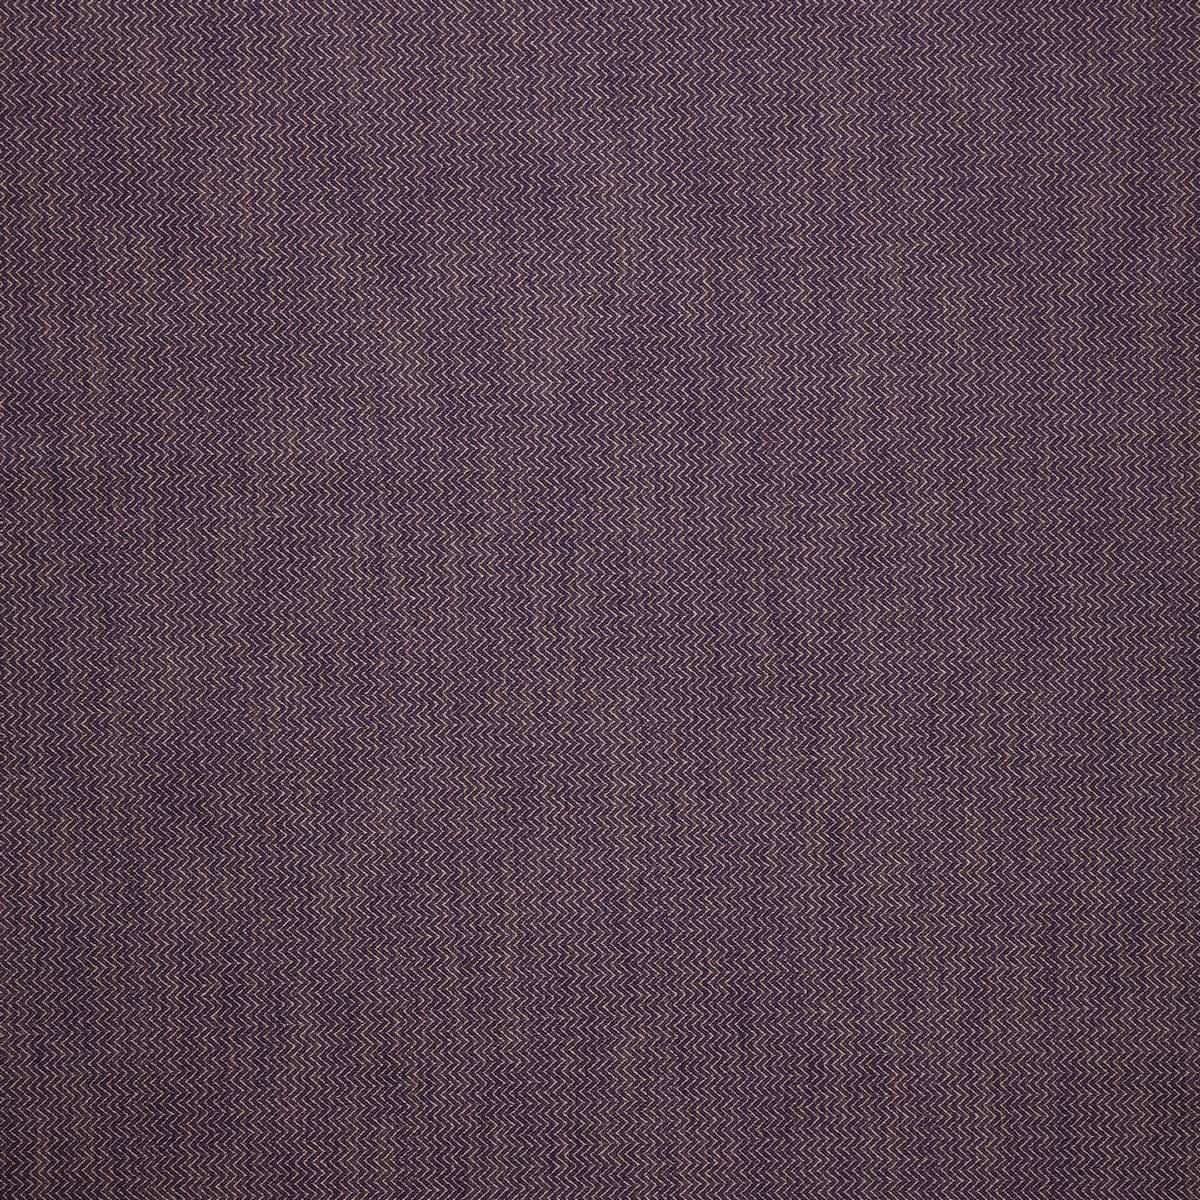 Bowmore Cassis Fabric